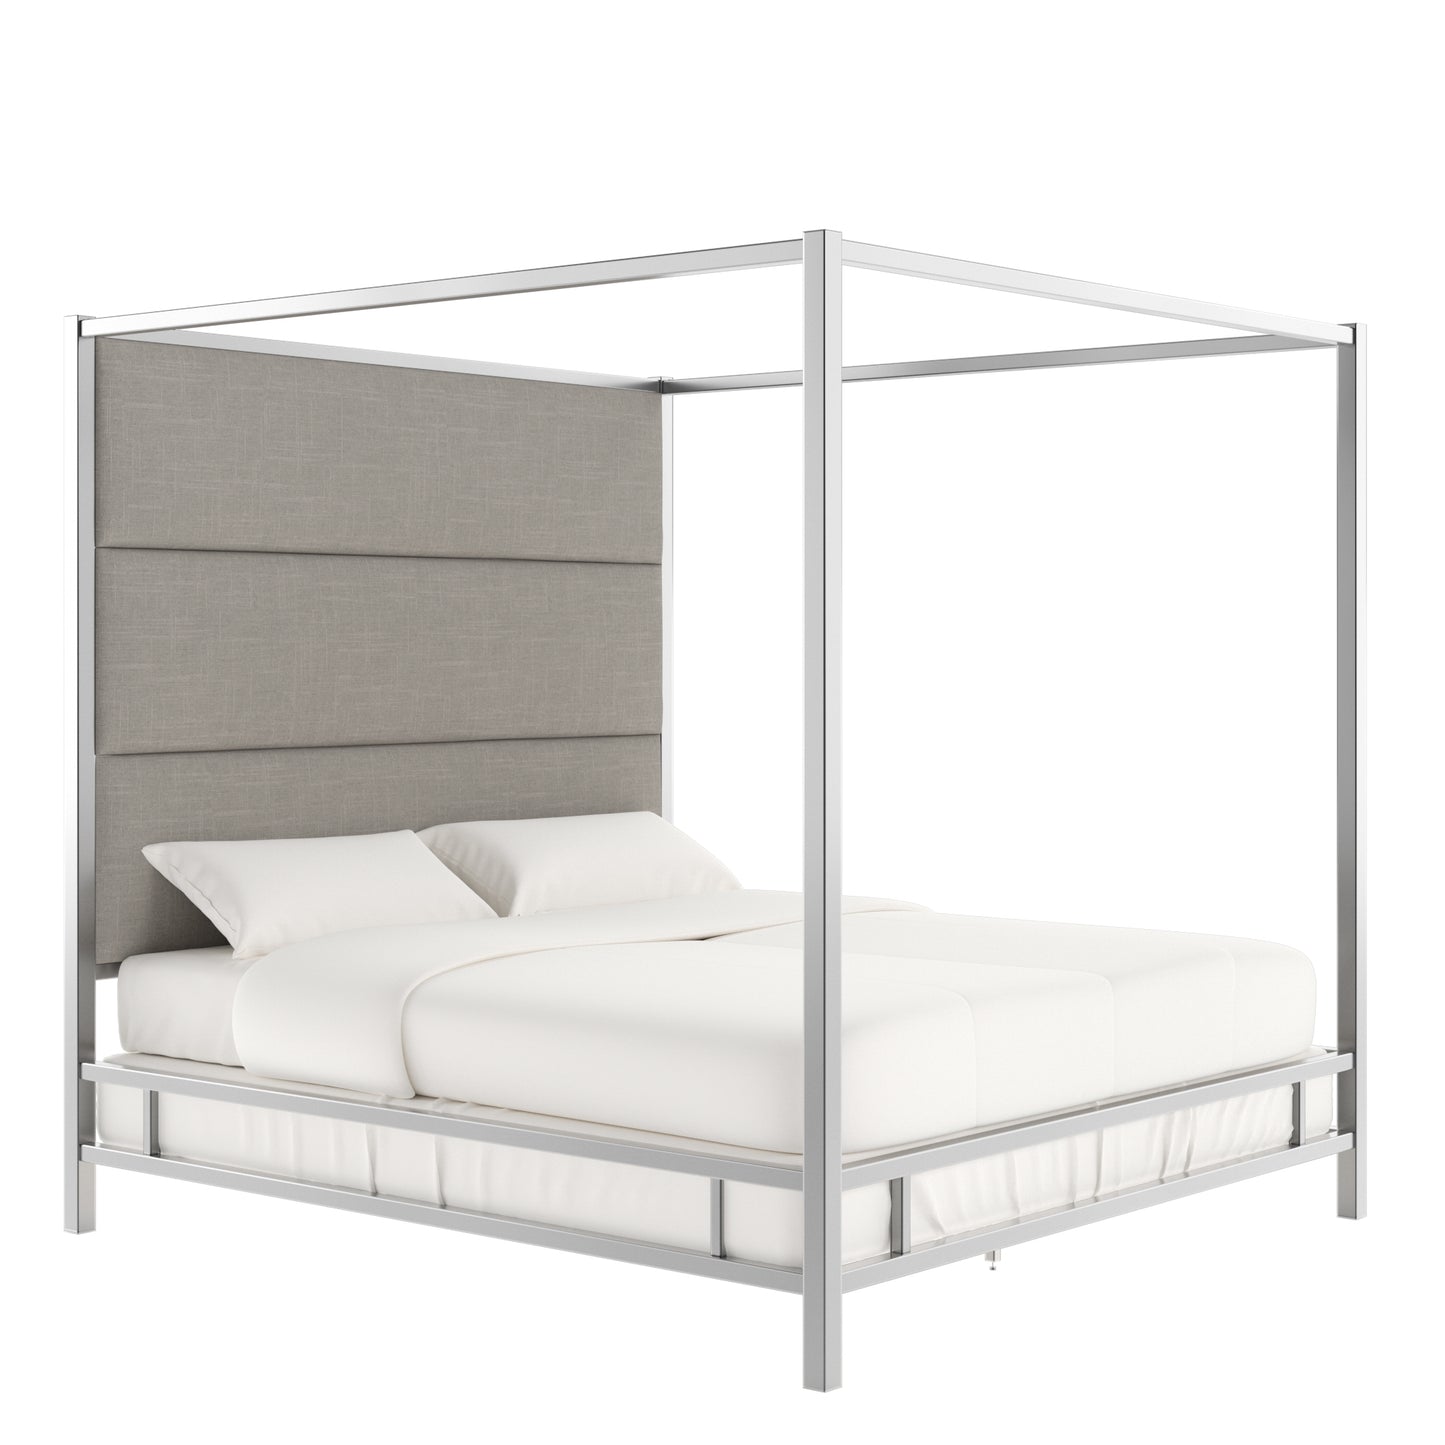 Metal Canopy Bed with Linen Panel Headboard - Grey Linen, Chrome Finish, King Size